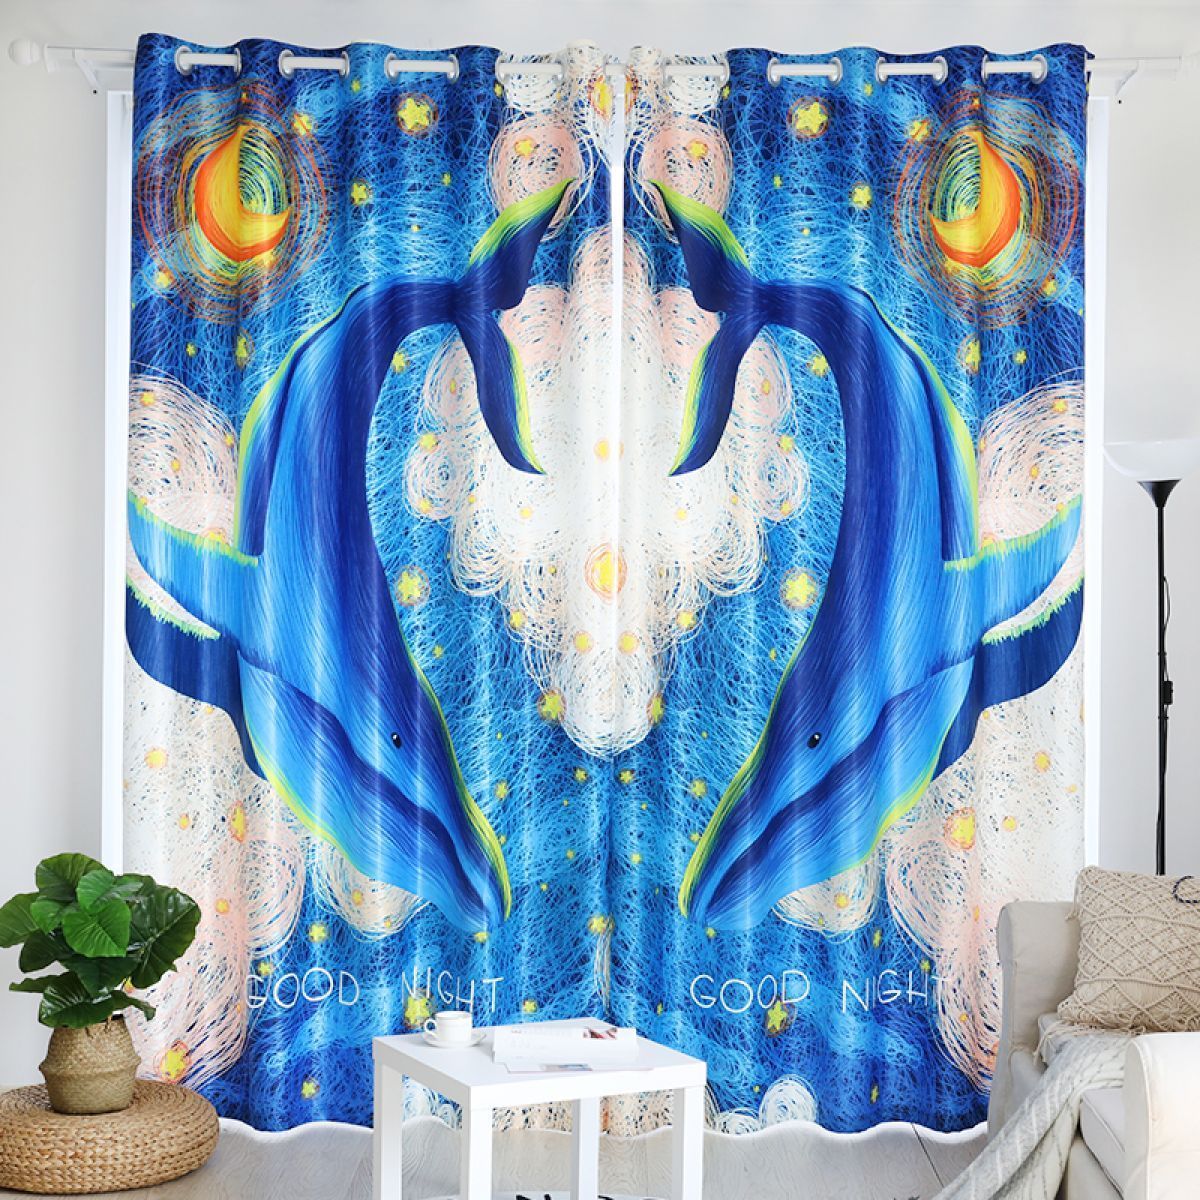 Whales In The Night Sky Printed Window Curtain Home Decor